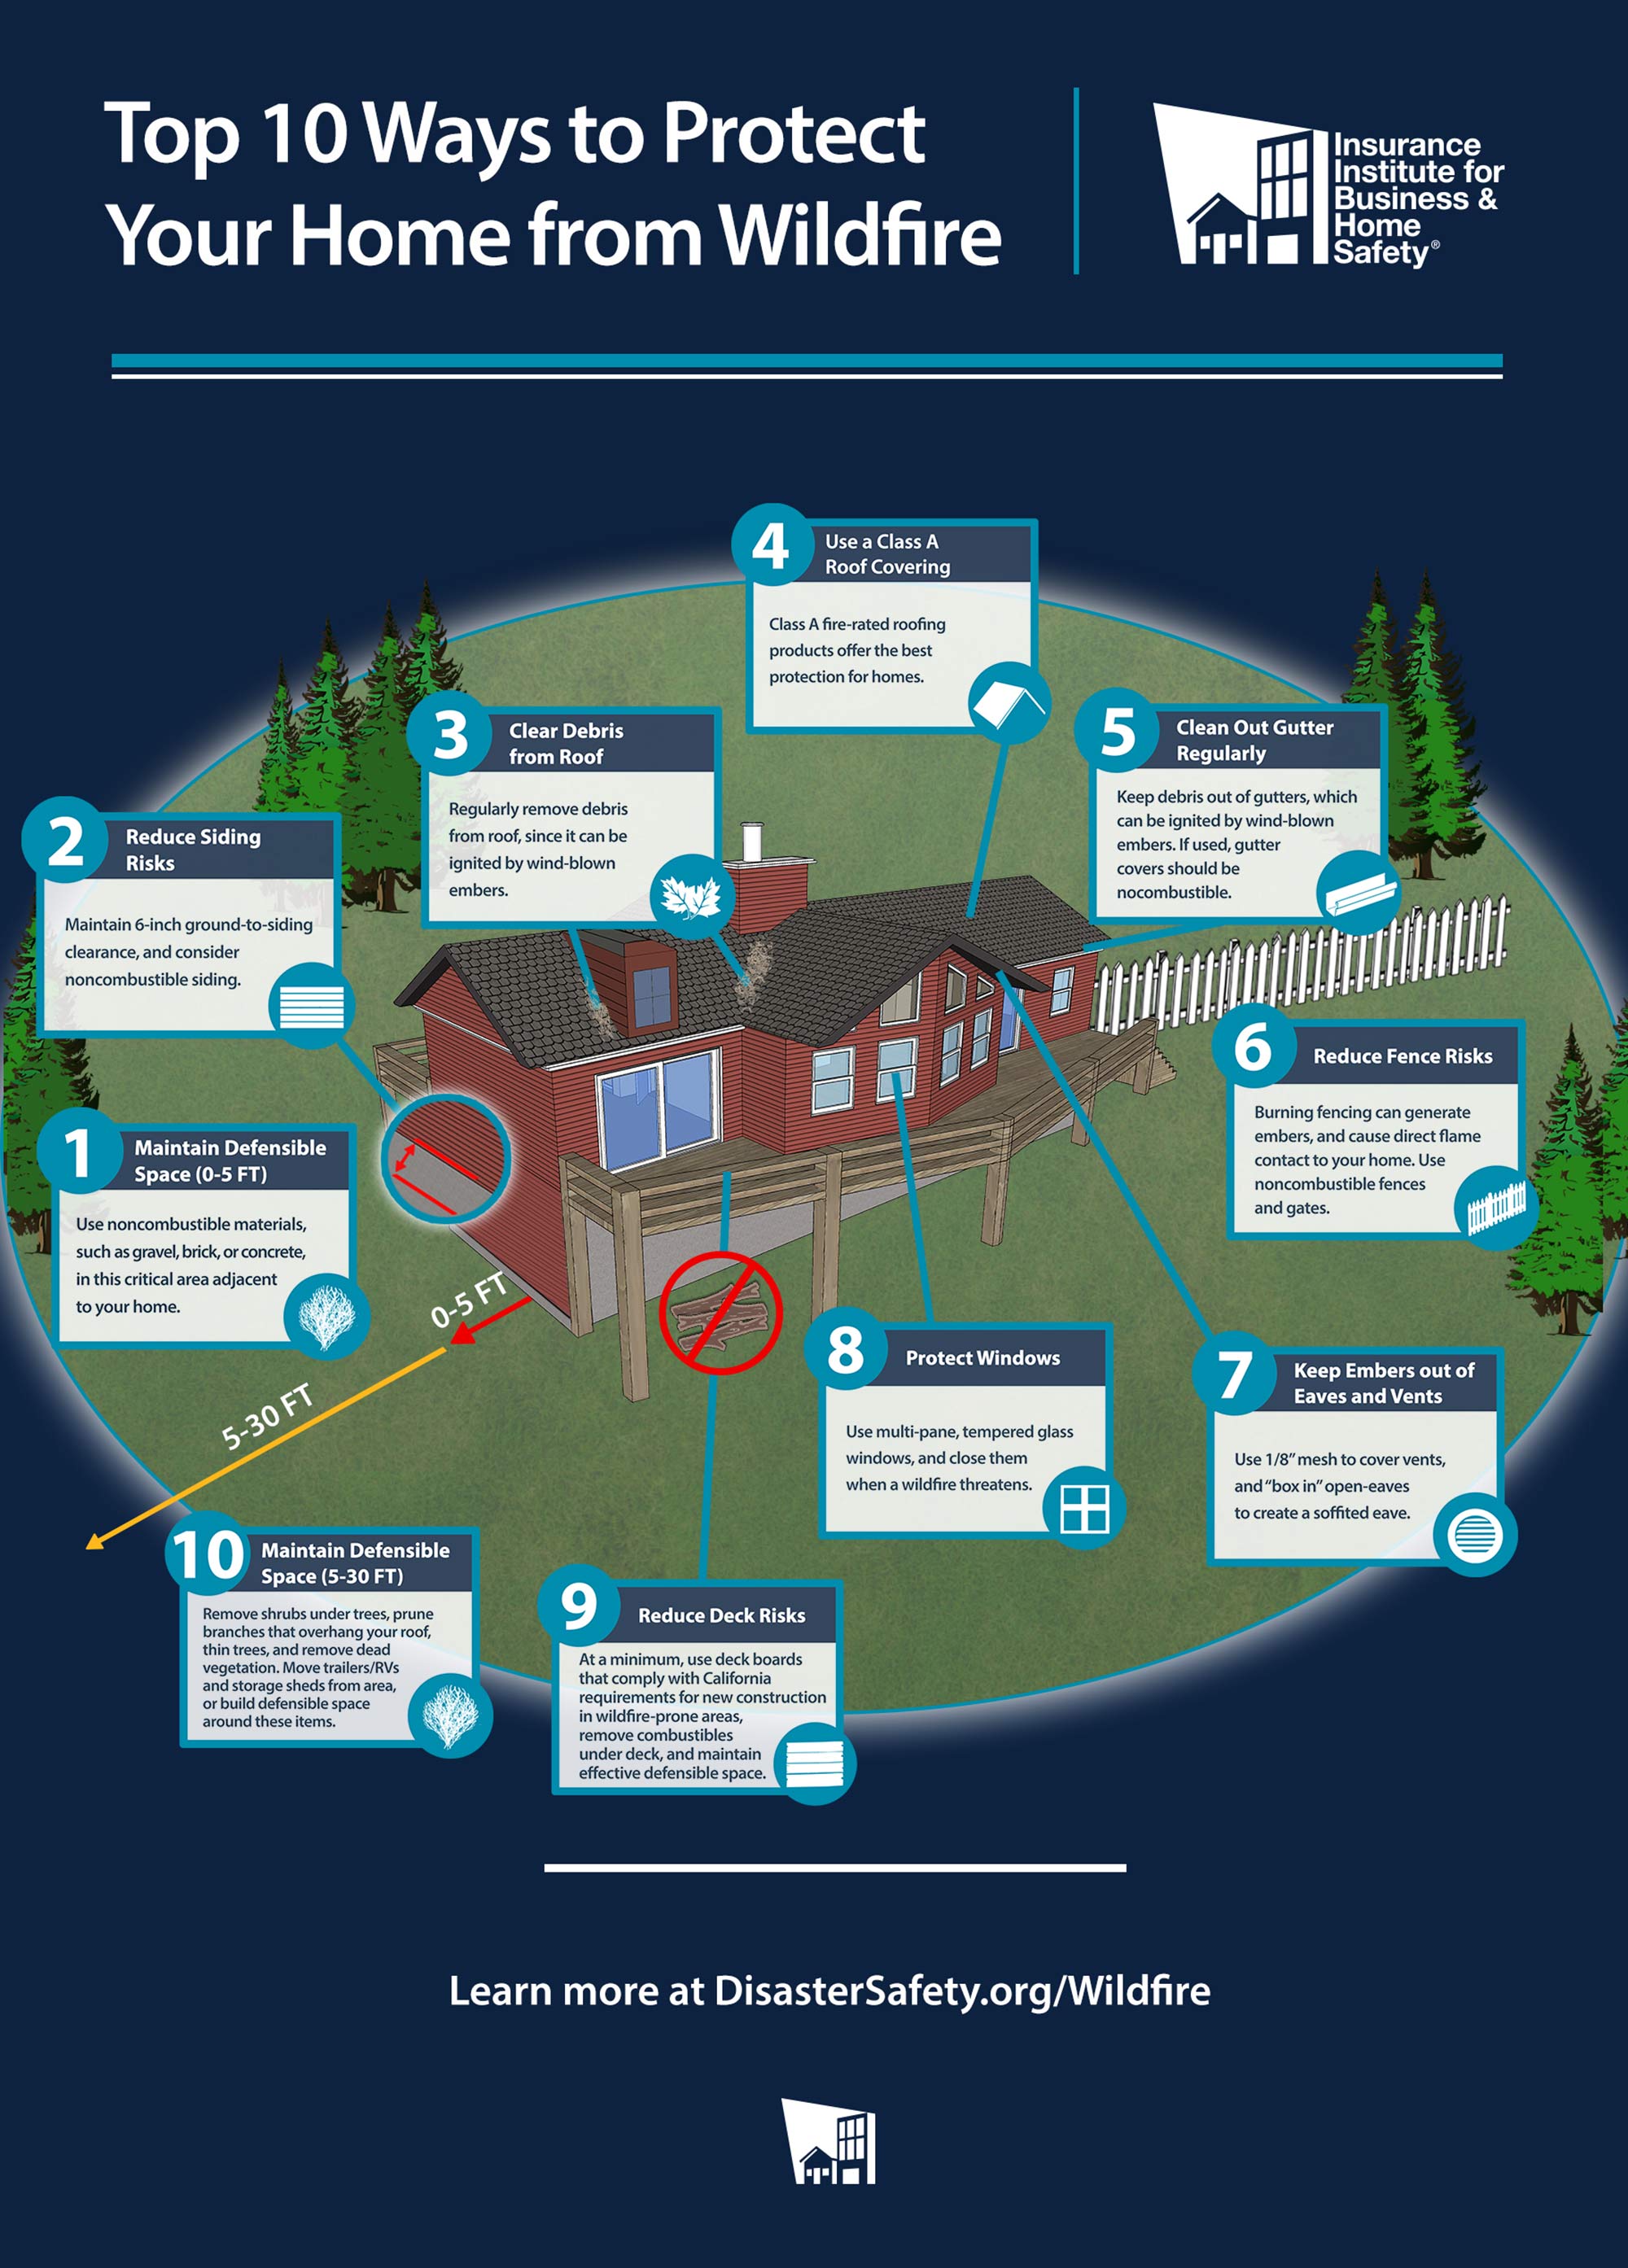 Thumbnail of Insurance Institute for Business & Home Safety graphic about protecting your home from wildfire.